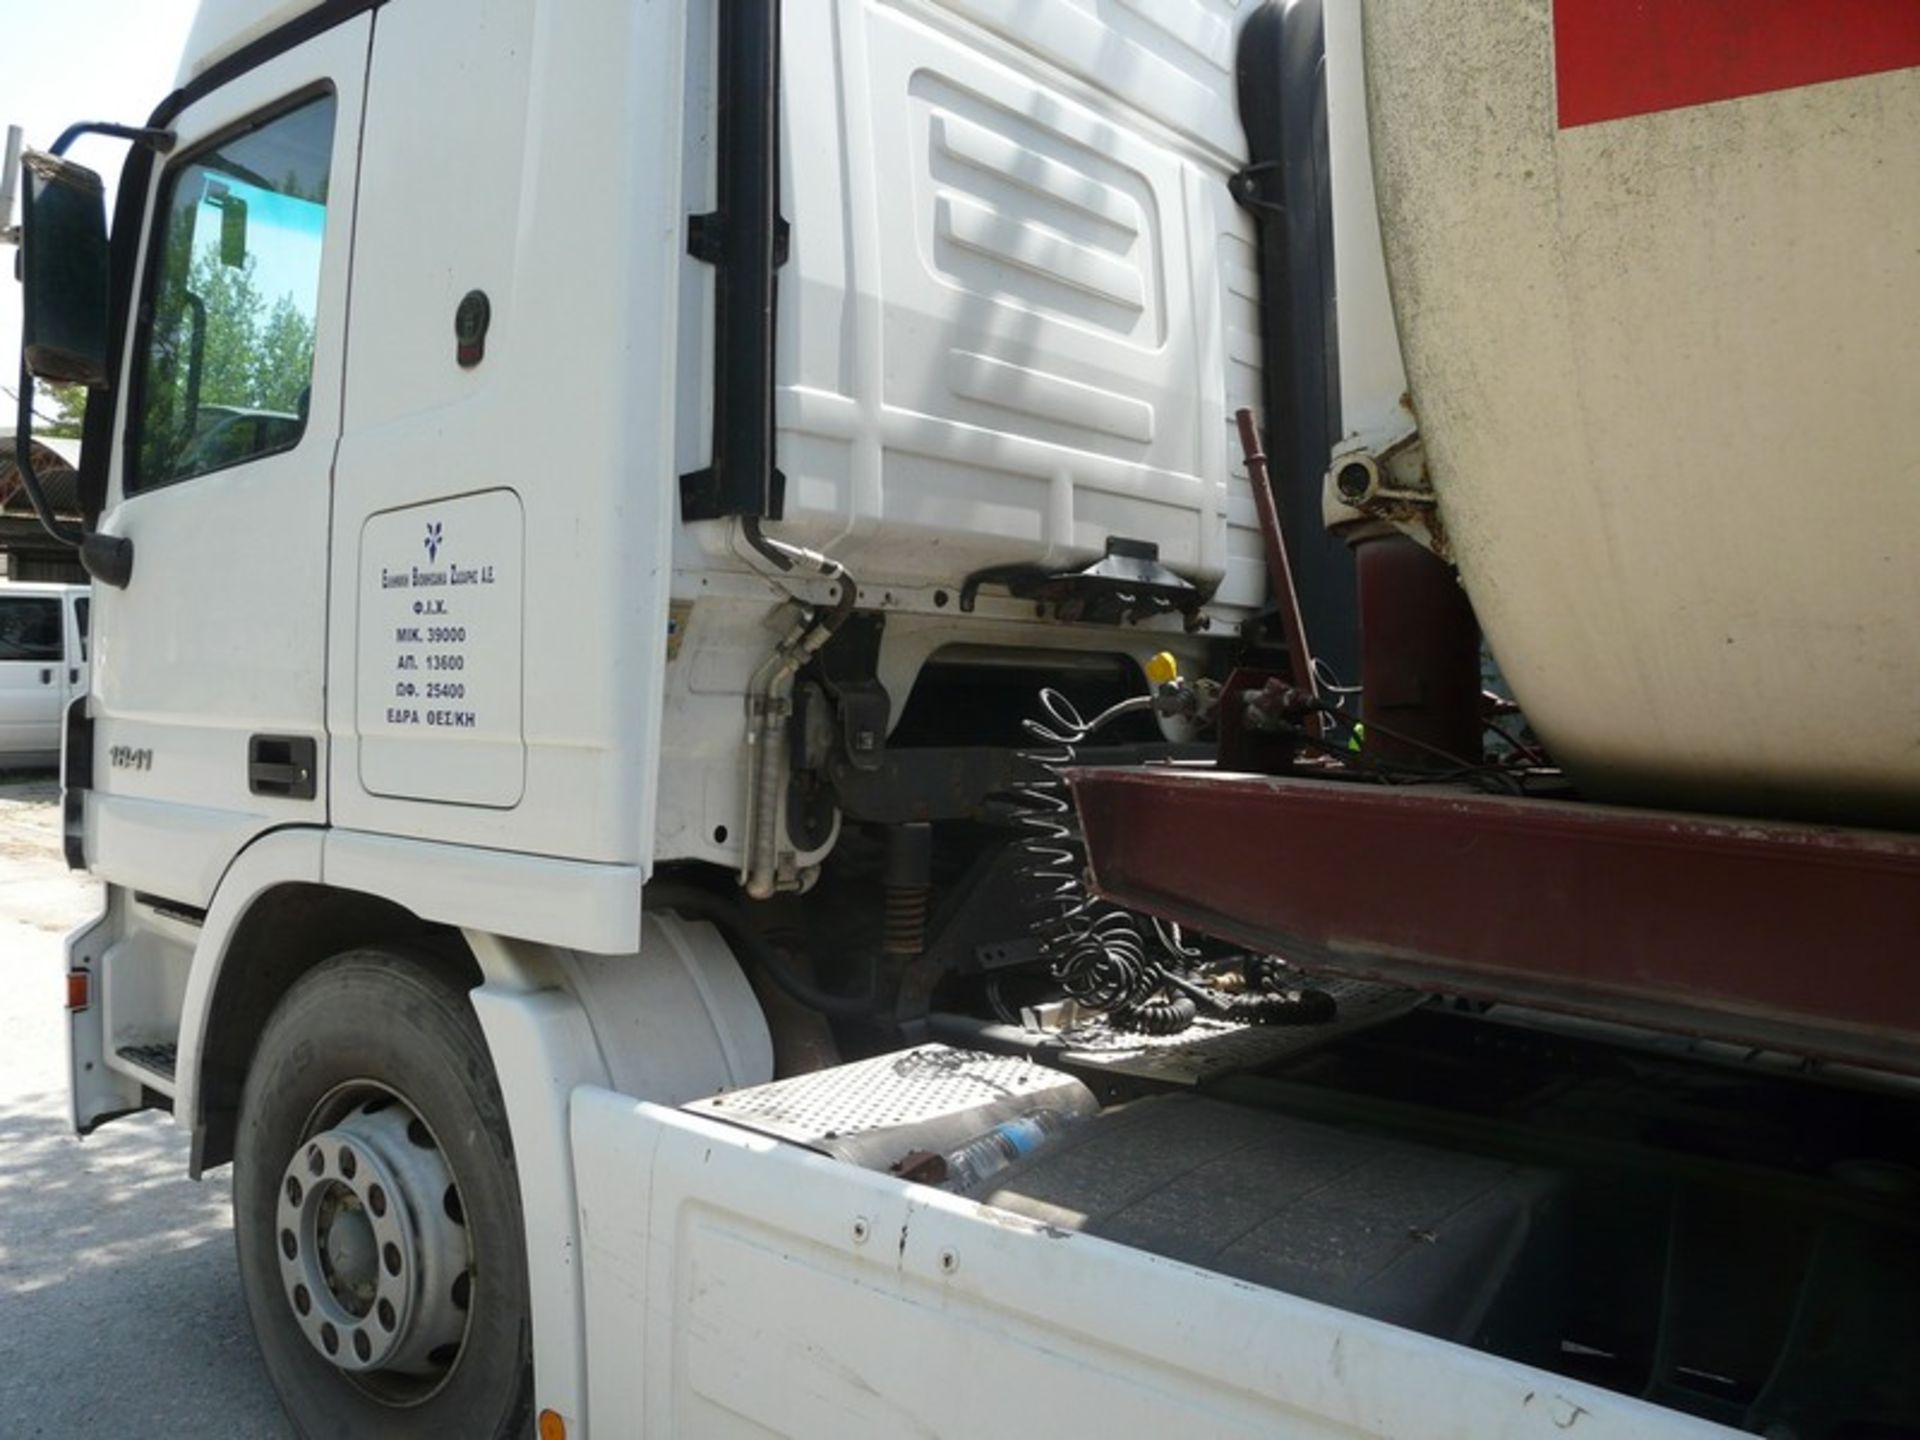 MERCEDES ACTROS Curtain side , REG NIK 4634,DIESEL , KM : 644682,Service Book available , Y.O.M 2004 - Image 3 of 12